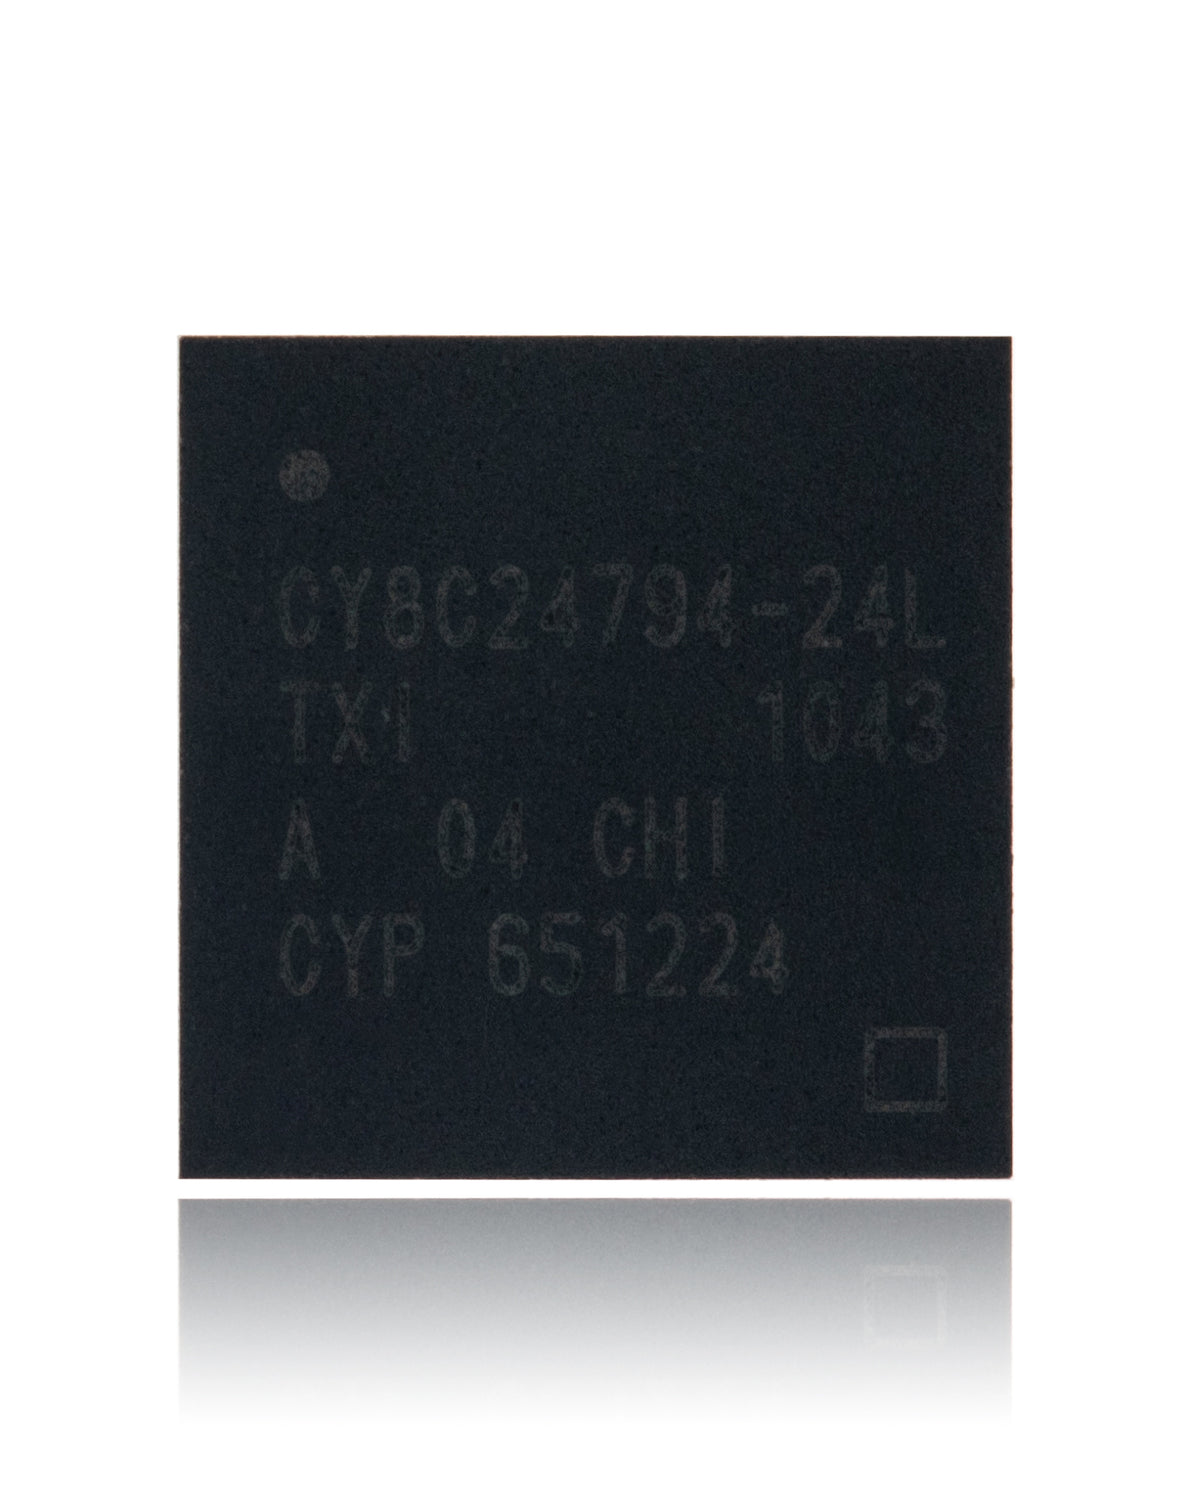 PROGRAMMABLE SYSTEM-ON IC COMPATIBLE WITH MACBOOK PRO (CY8C24794 / CY8C24794-24L / CY8C24794-24LTXI: QFN-56 PIN)